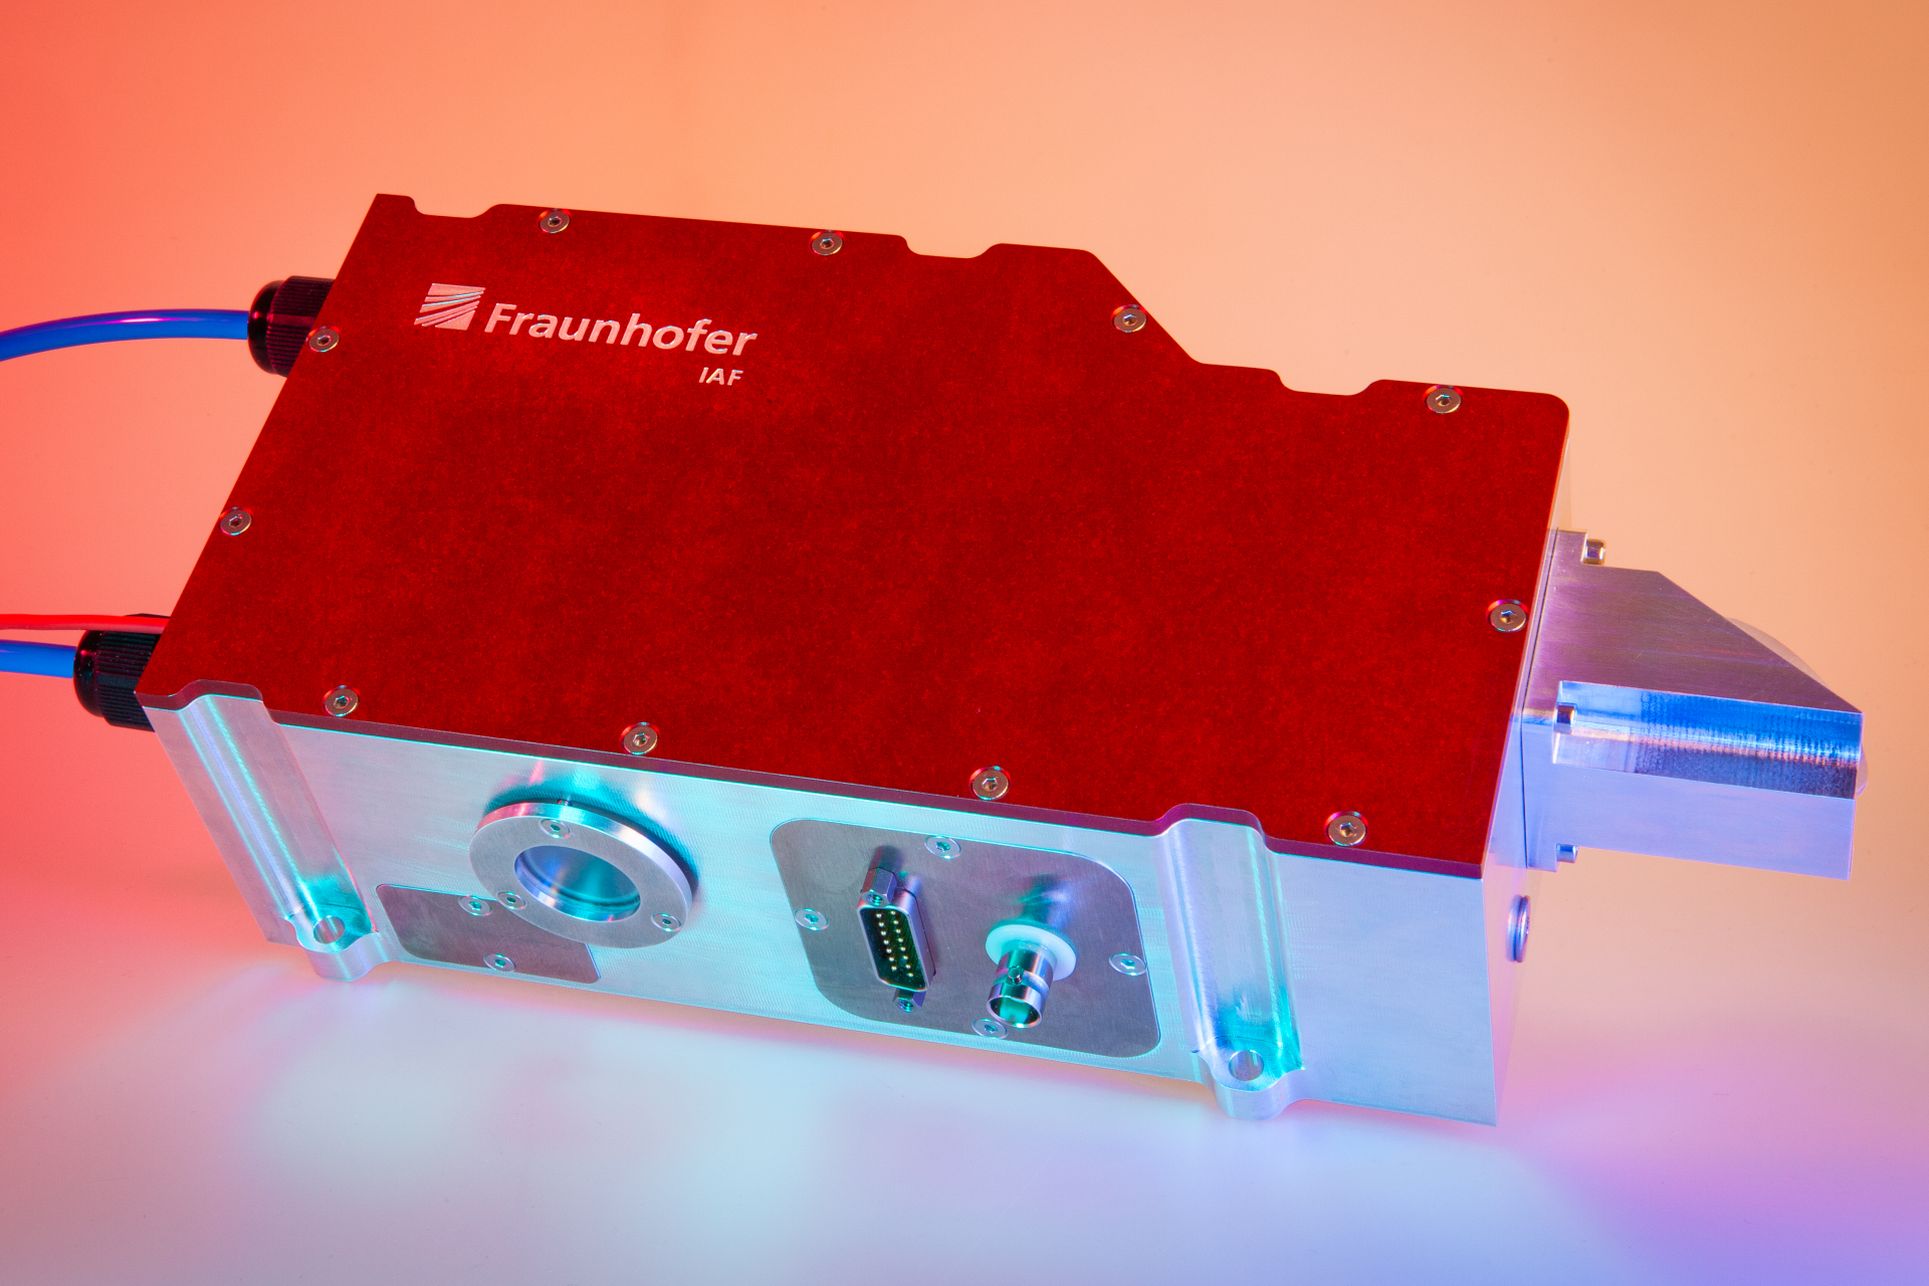 Single-mode VECSEL module with up to 2.4 W output power for the frequency range between 1.9 and 2.5 µm, developed as a pump source for quantum frequency converters, © Fraunhofer IAF